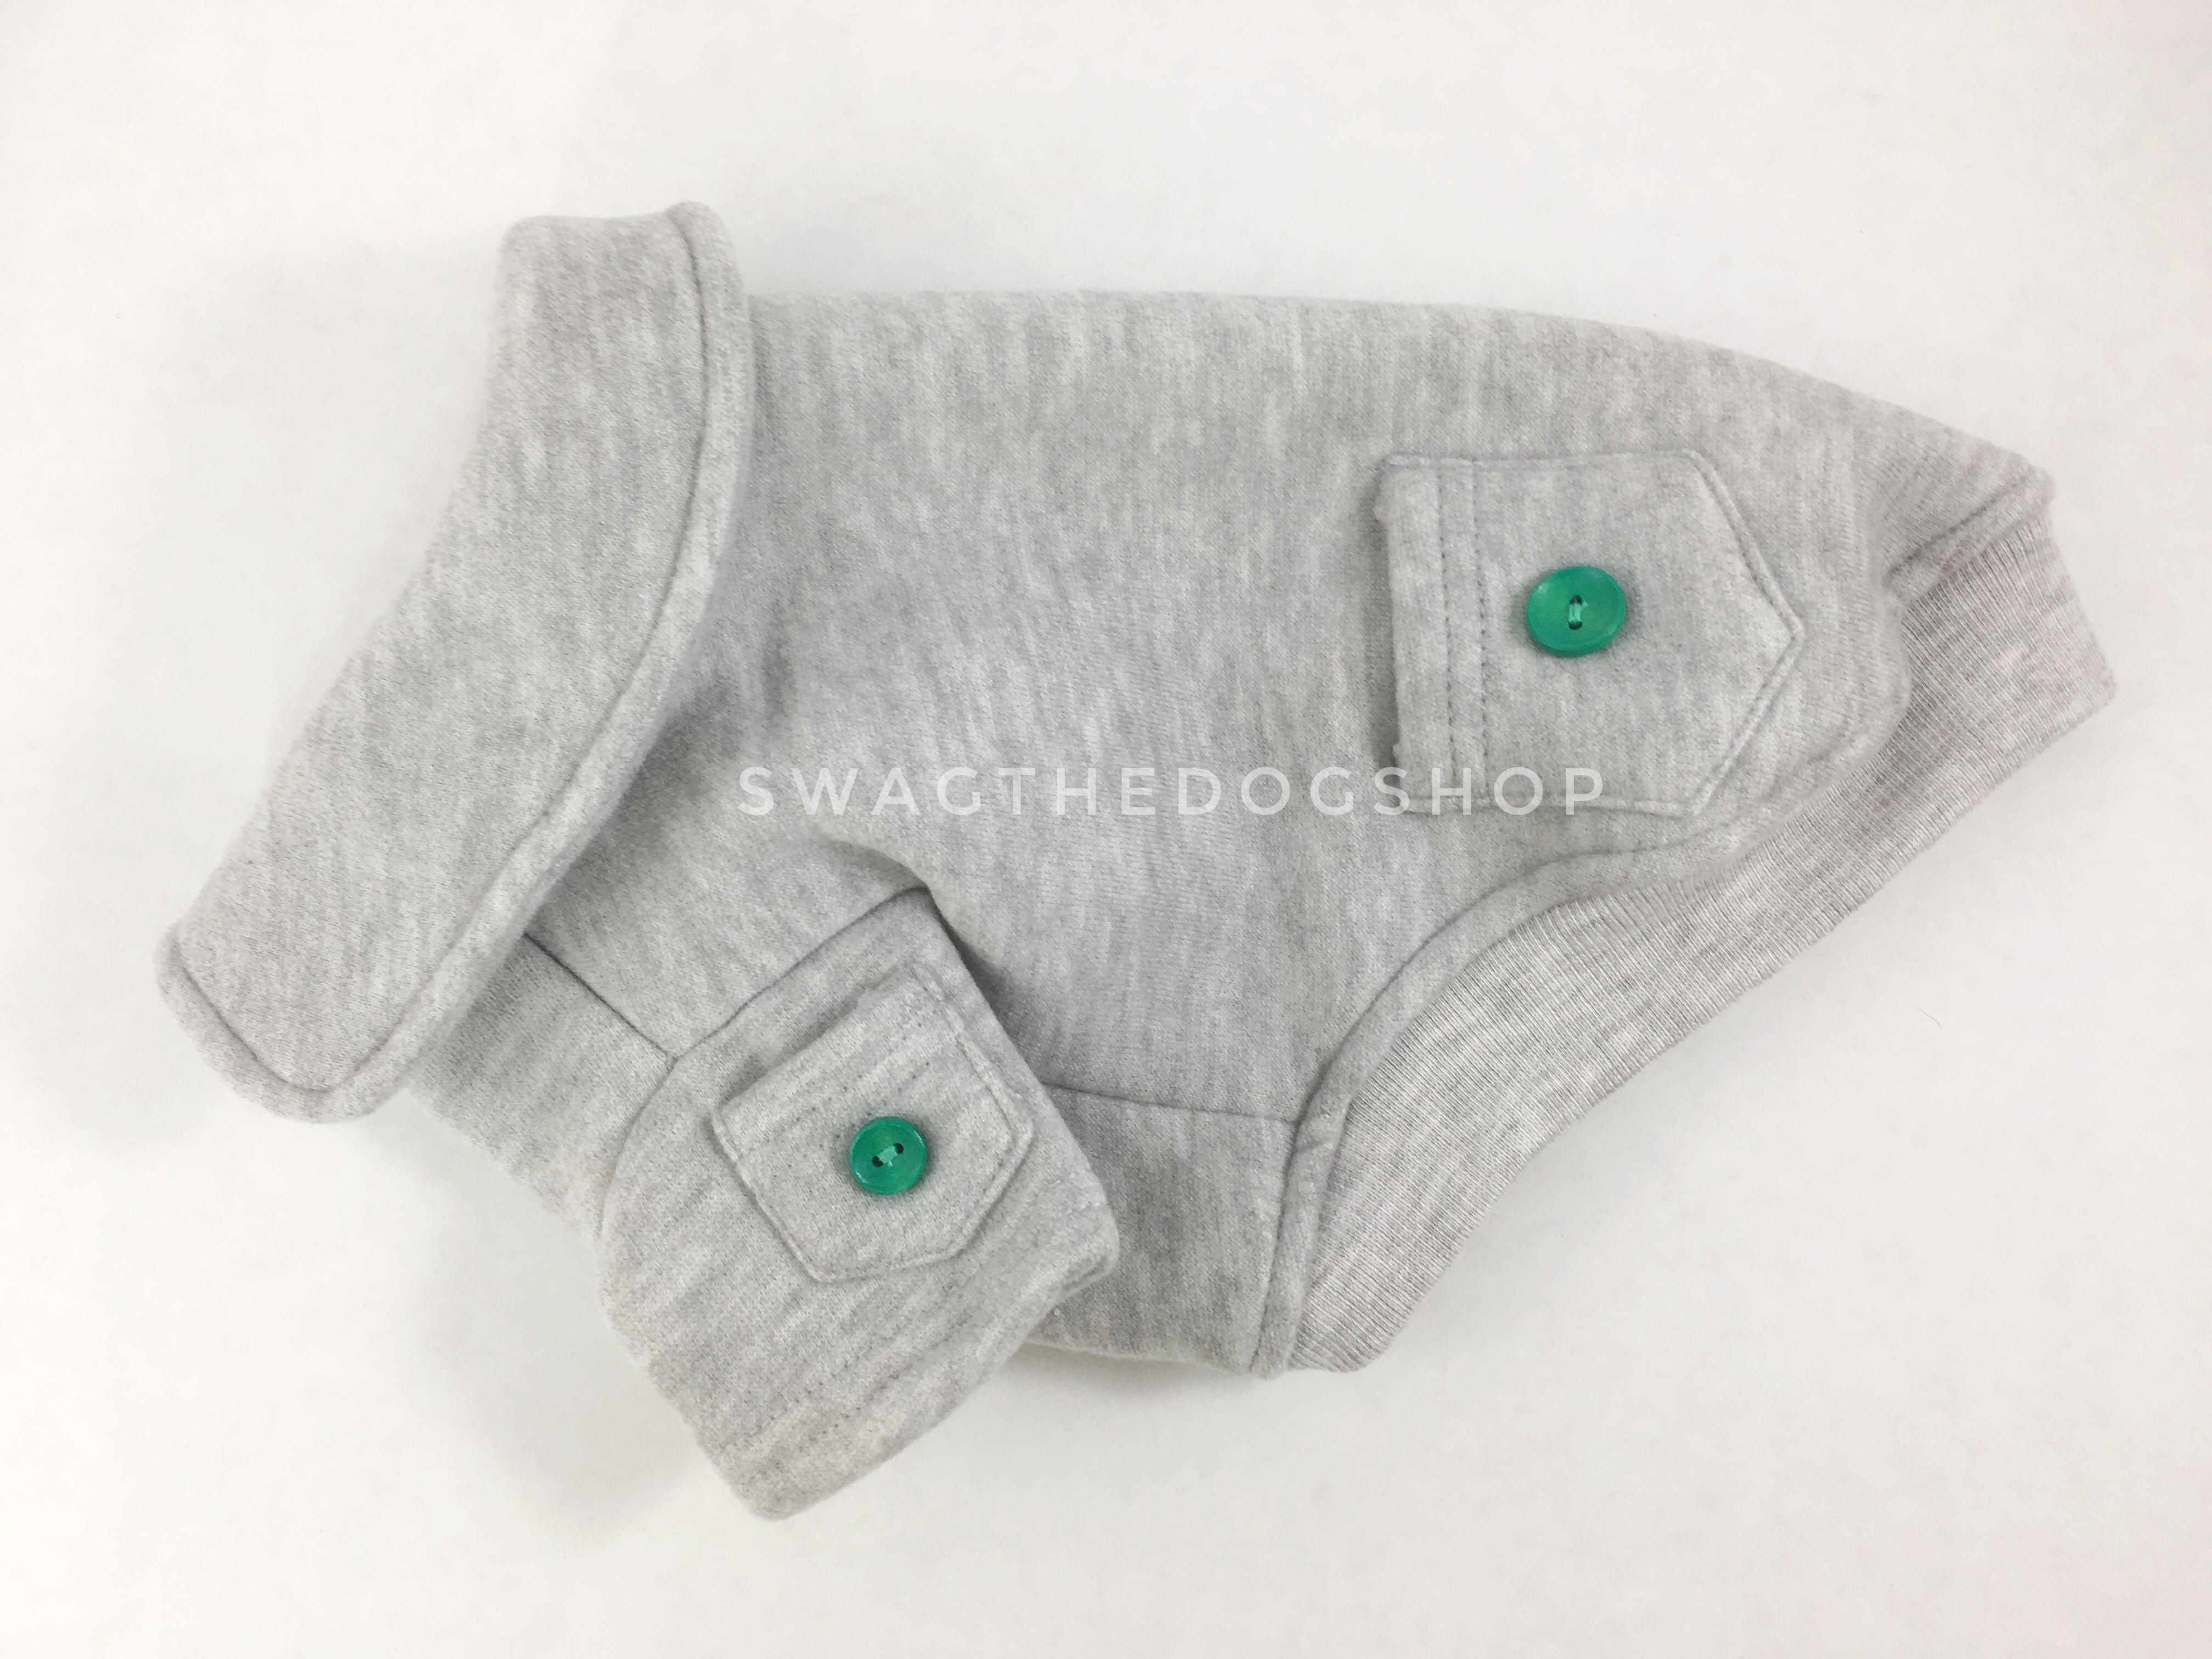 Yachtsman Heather Gray Shirt - Product Side View. Heather Gray Shirt with Fleece Inside